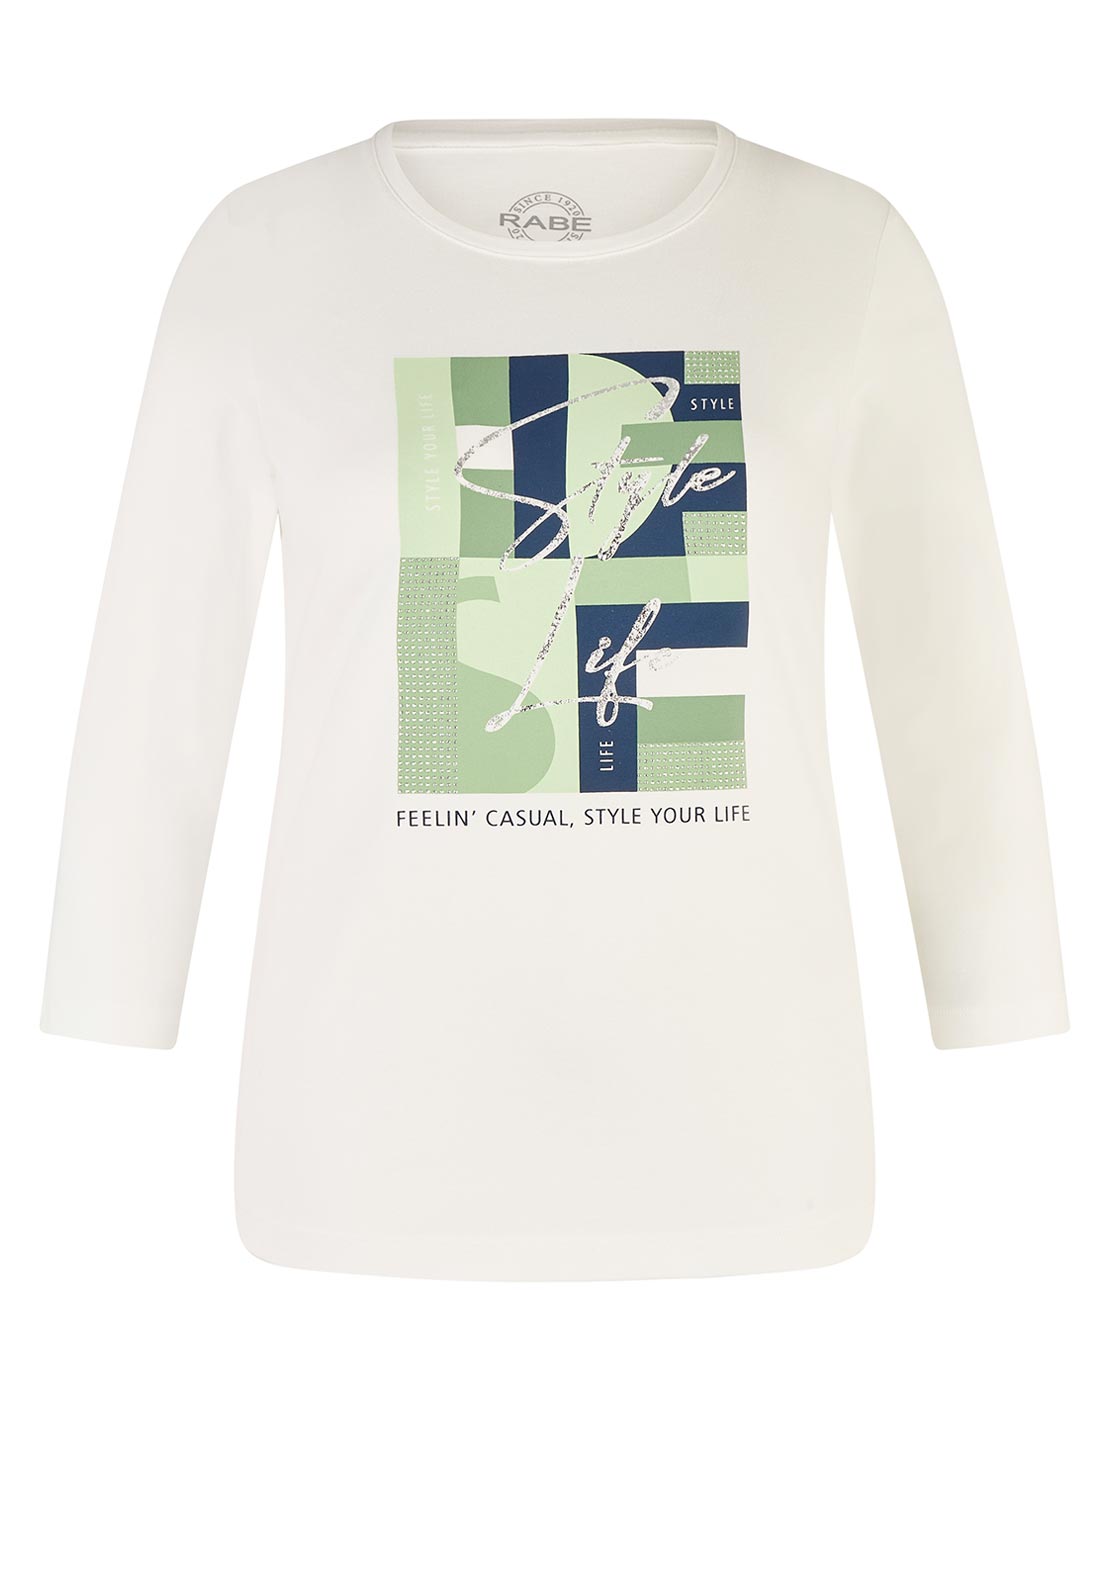 McElhinneys - White T-Shirt, Off Life Rabe Graphic Your Style